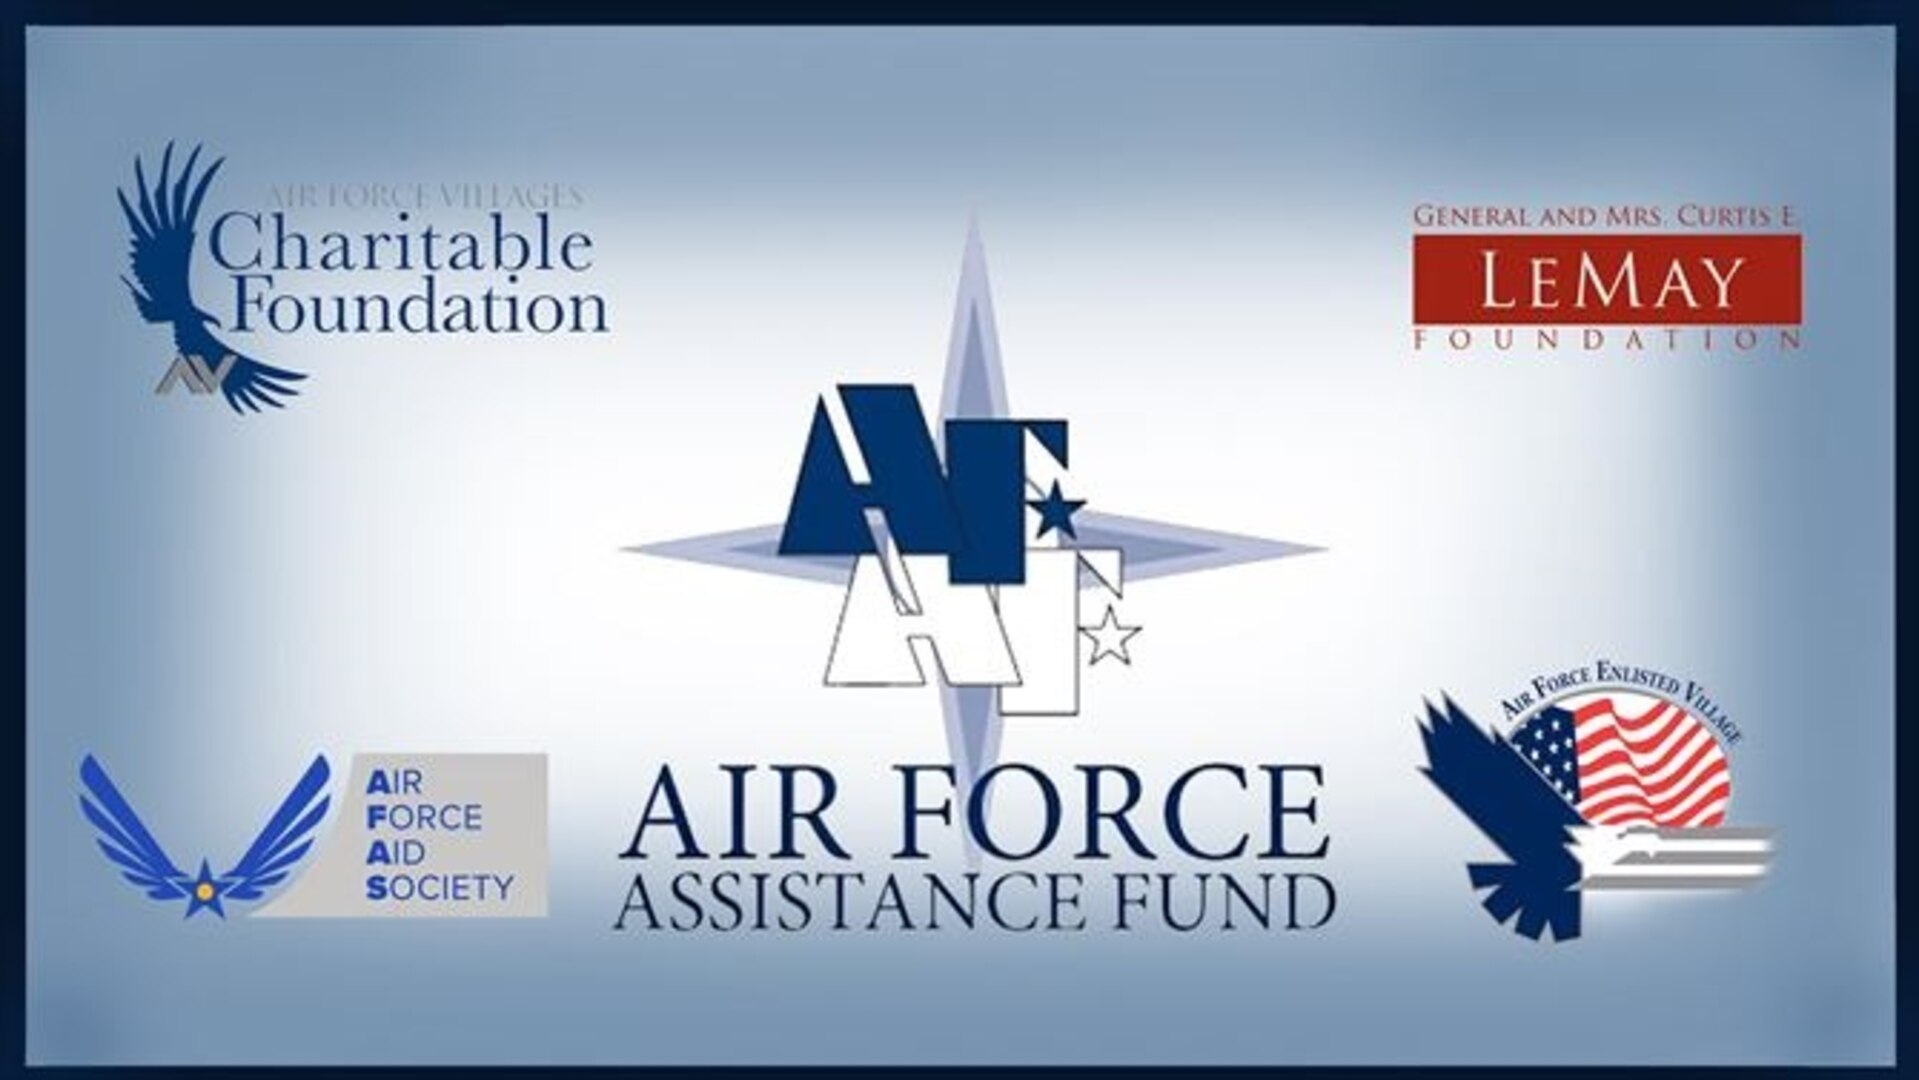 The annual Air Force Assistance Fund, or AFAF, campaign will begin March 18 and will run through April 26.